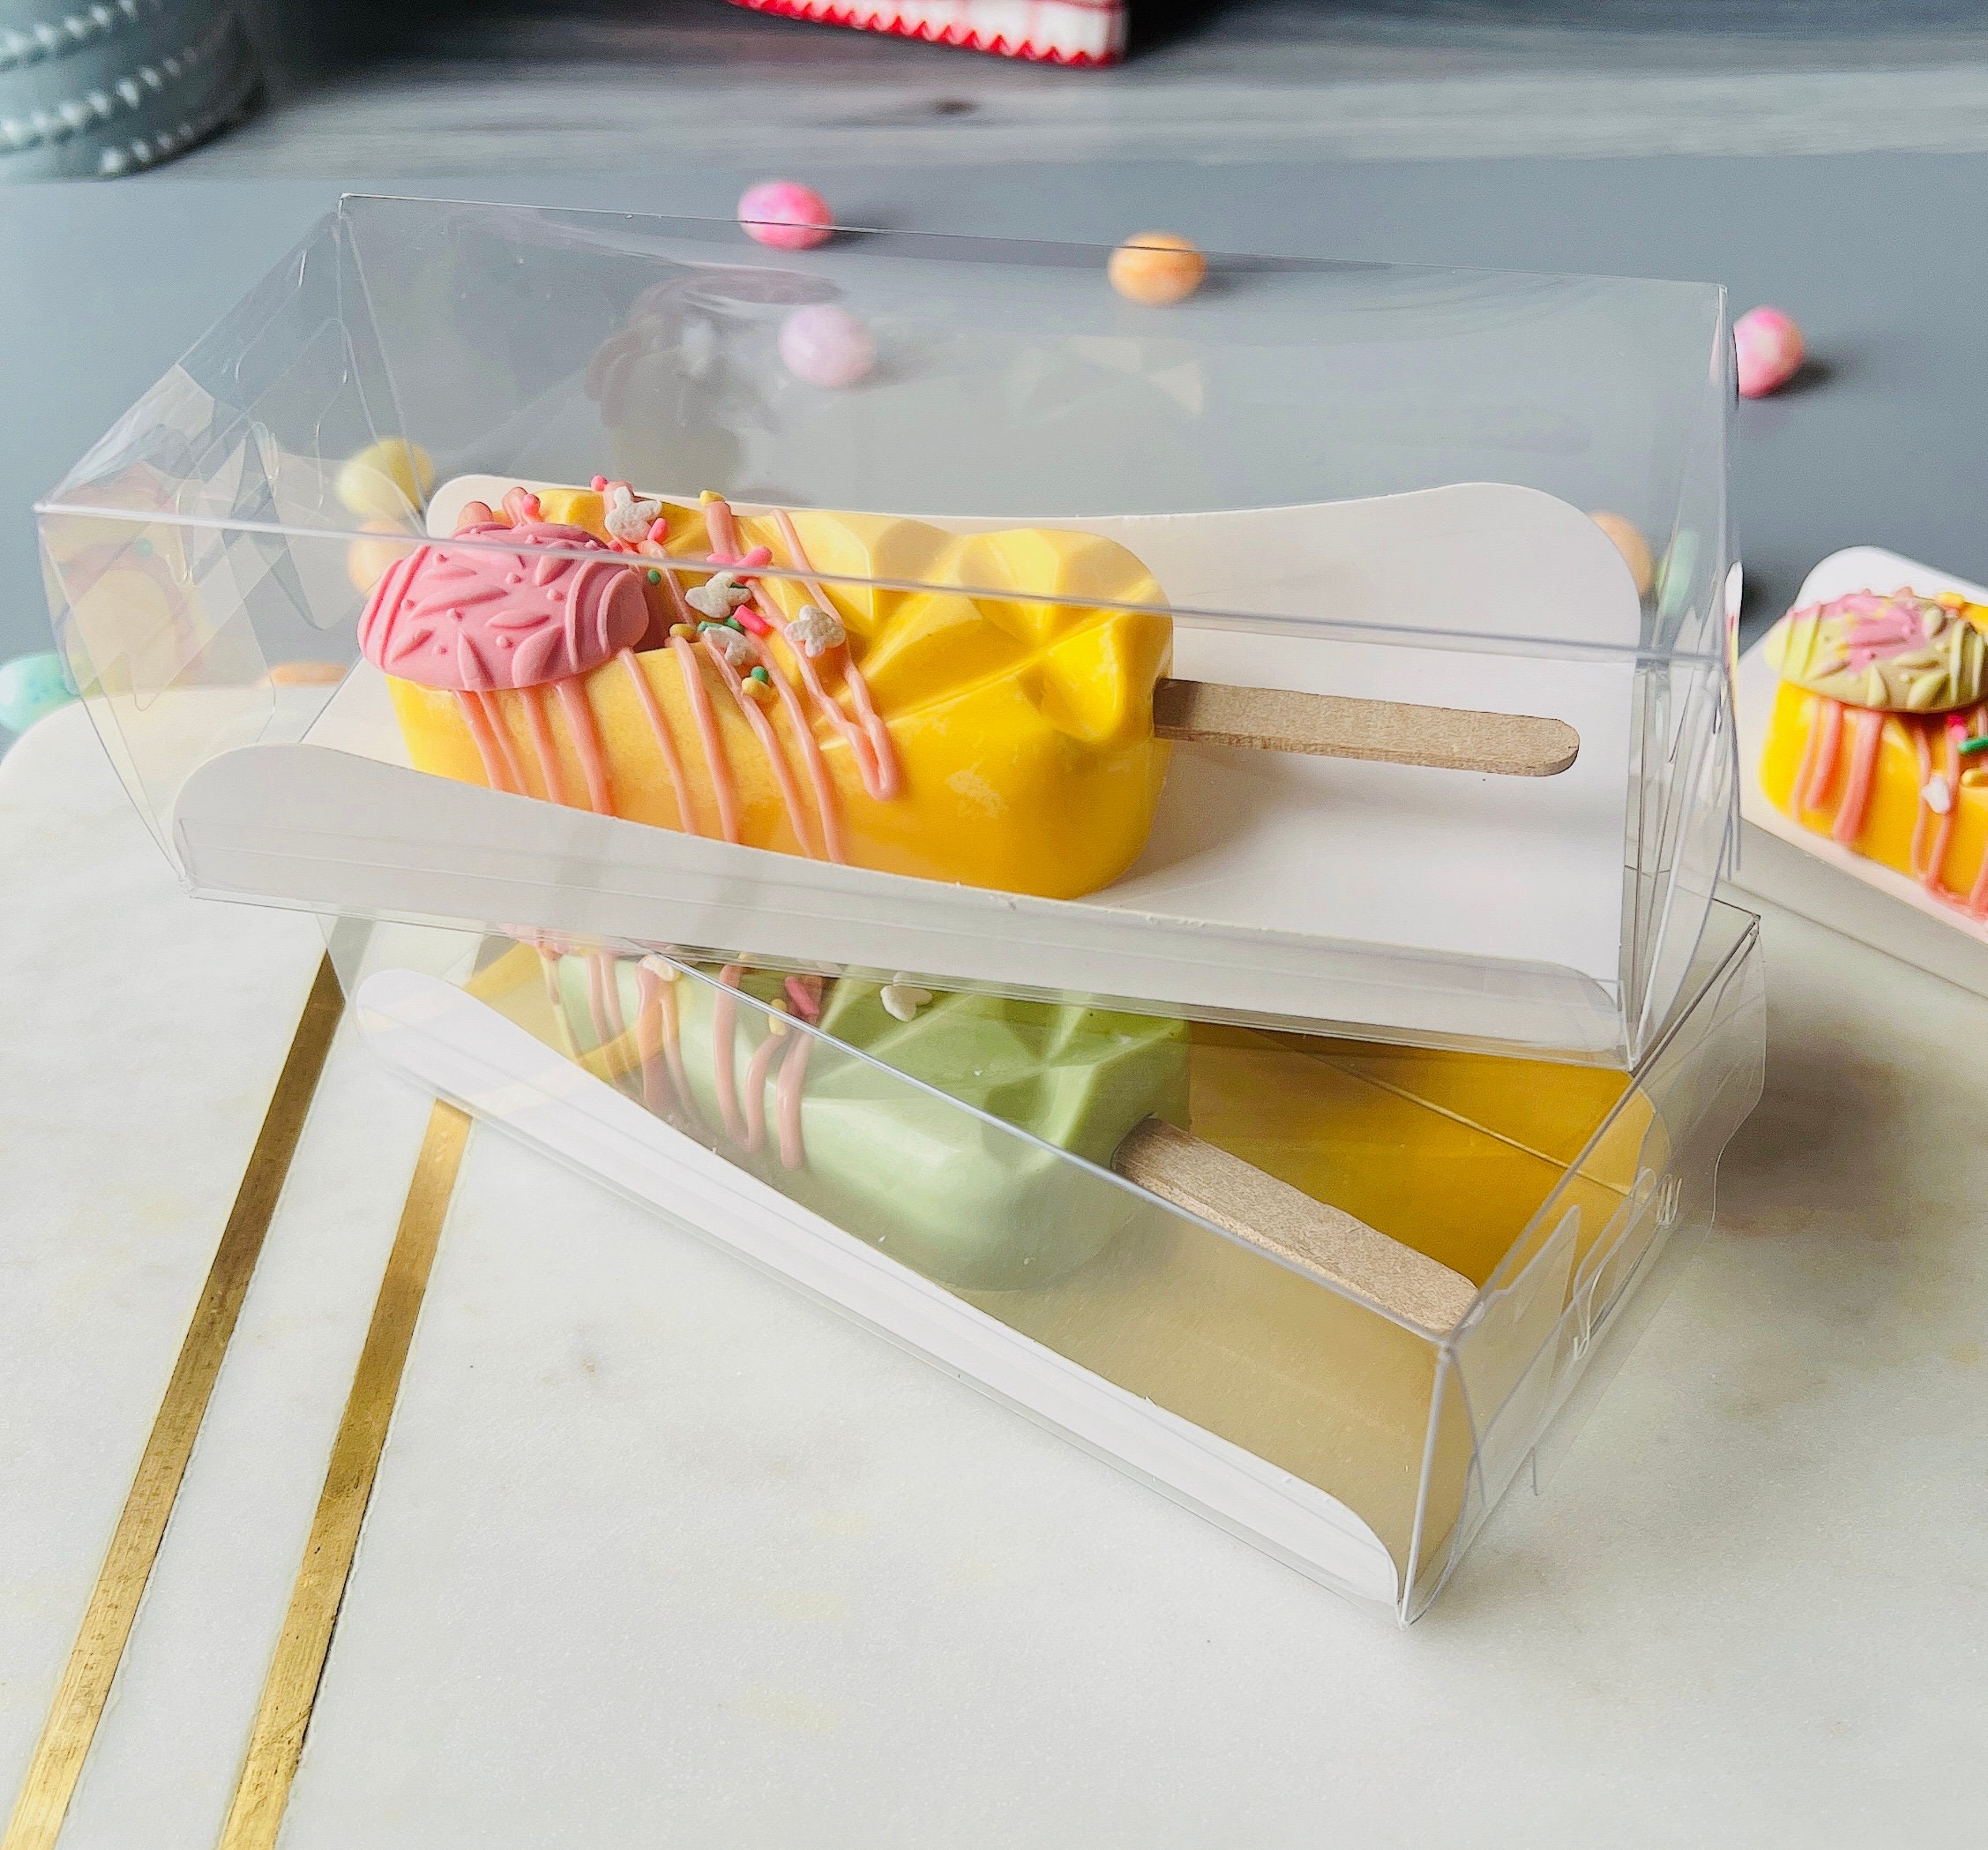 Shop Cakesicle Boxes: Single Cakesicle Boxes, Clear Boxes and Sets –  Sprinkle Bee Sweet